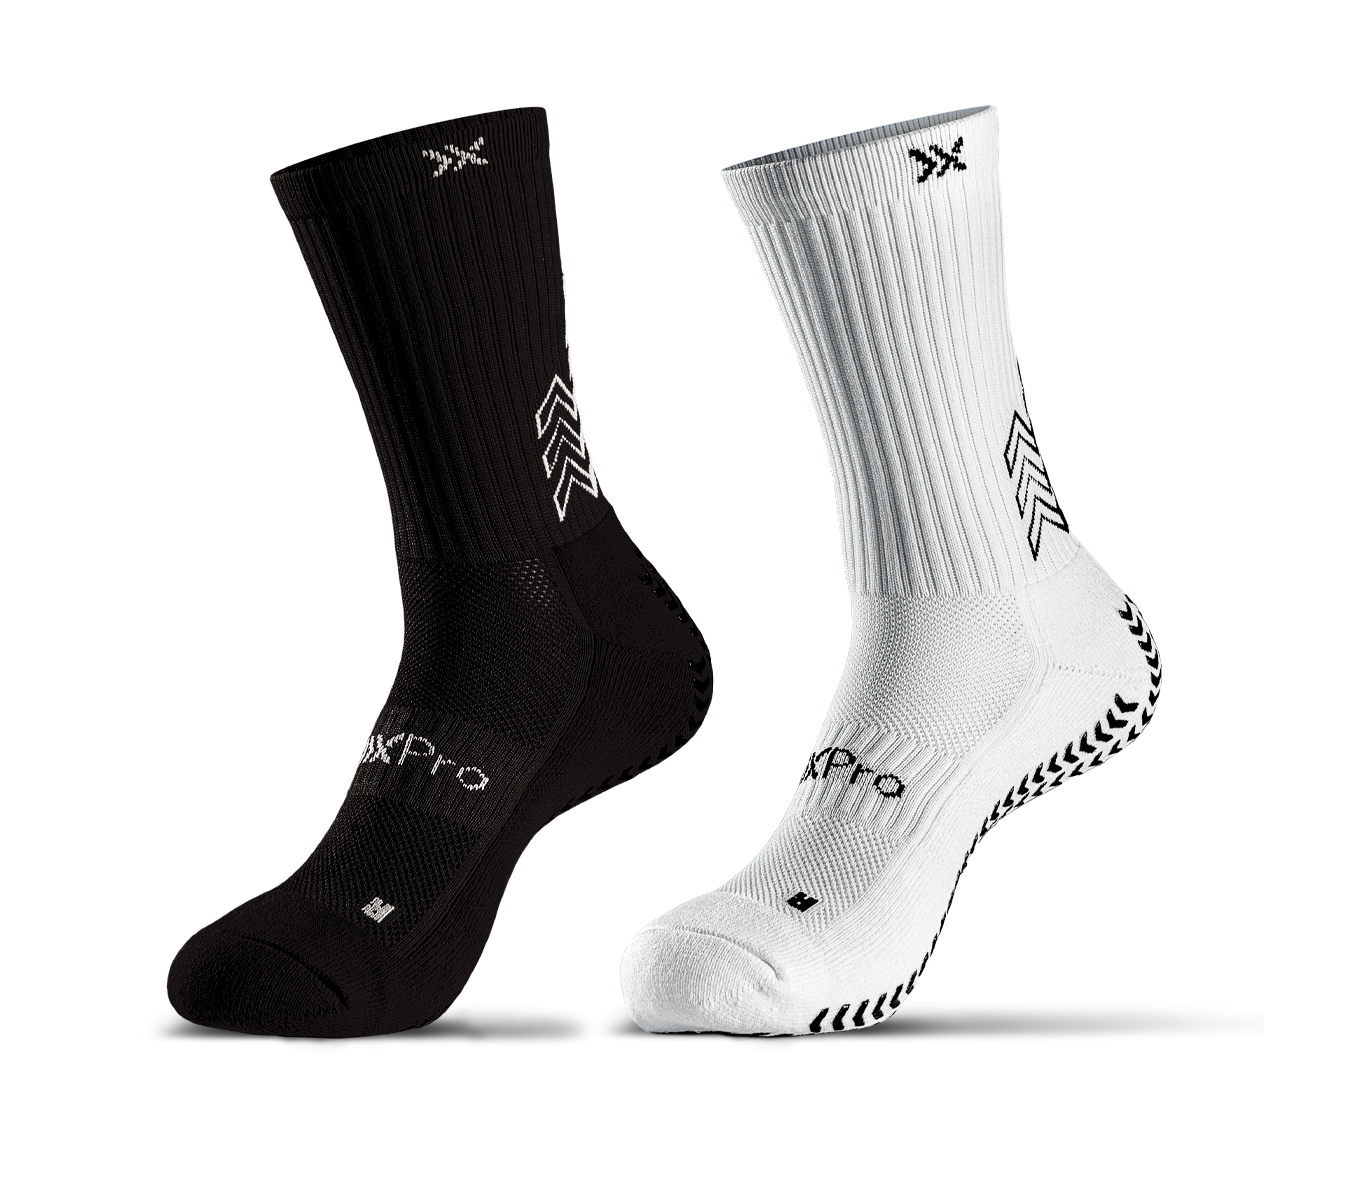 https://therugbyshop.co.uk/wp-content/uploads/2021/05/SOXPro-Grip-Sock-Classic_Black_1-Combo.png